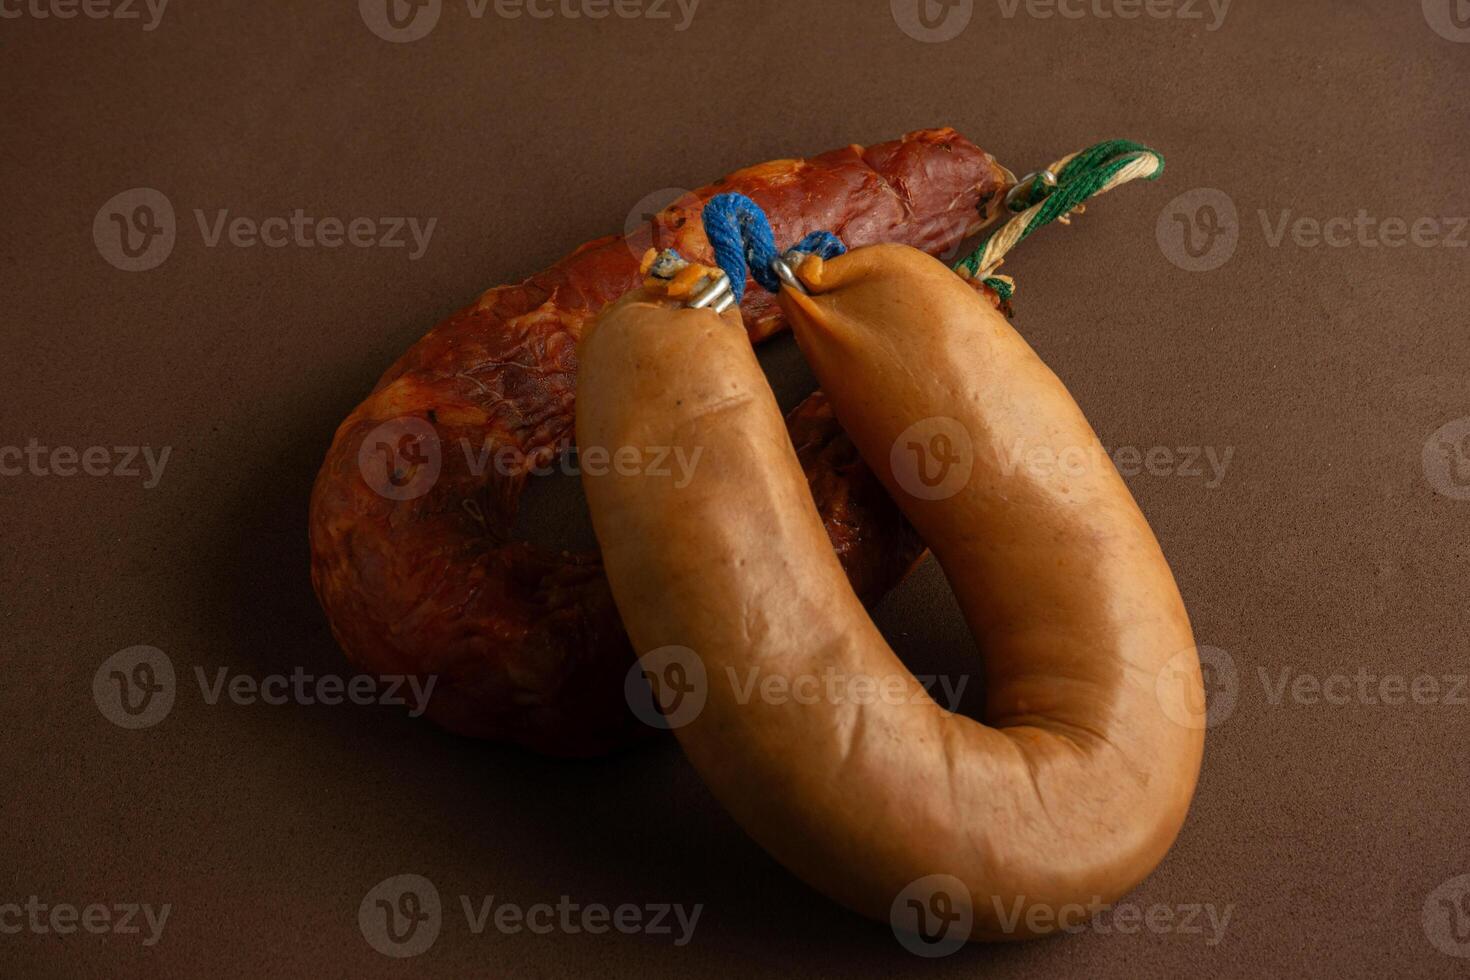 Traditional Alentejo sausages - linguica and farinheira - on a rustic brown background. photo